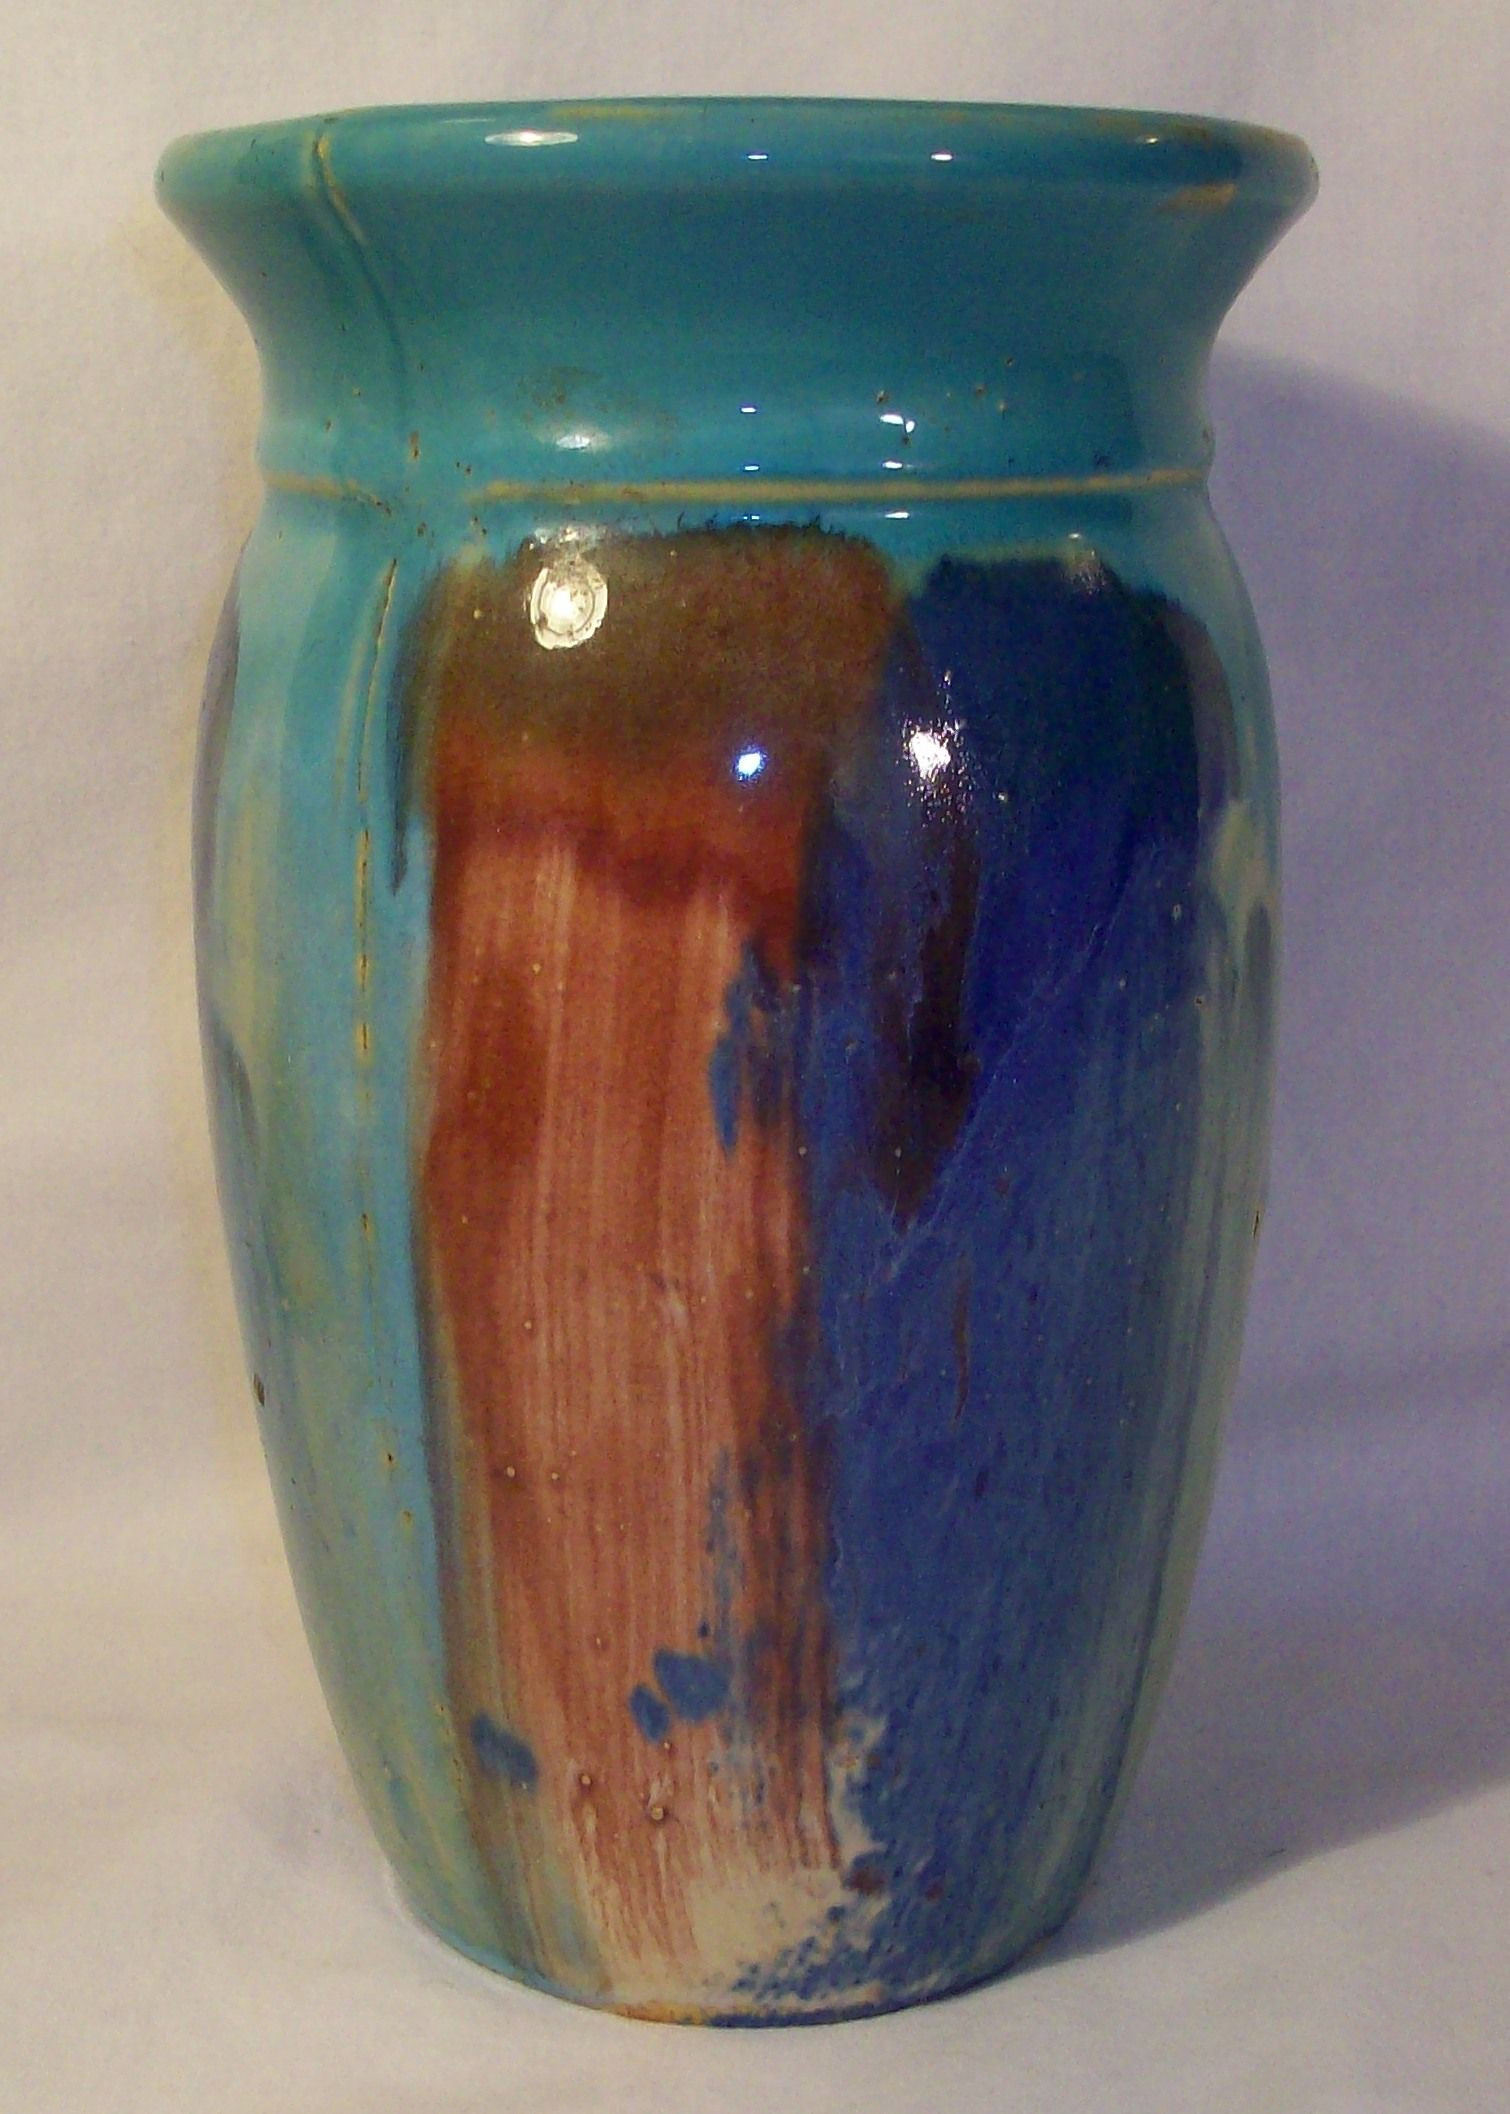 28 Awesome Large Turquoise Vase 2024 free download large turquoise vase of 1920s hull pottery early art large vase vintage pottery from throughout 1920s hull pottery early art large vase